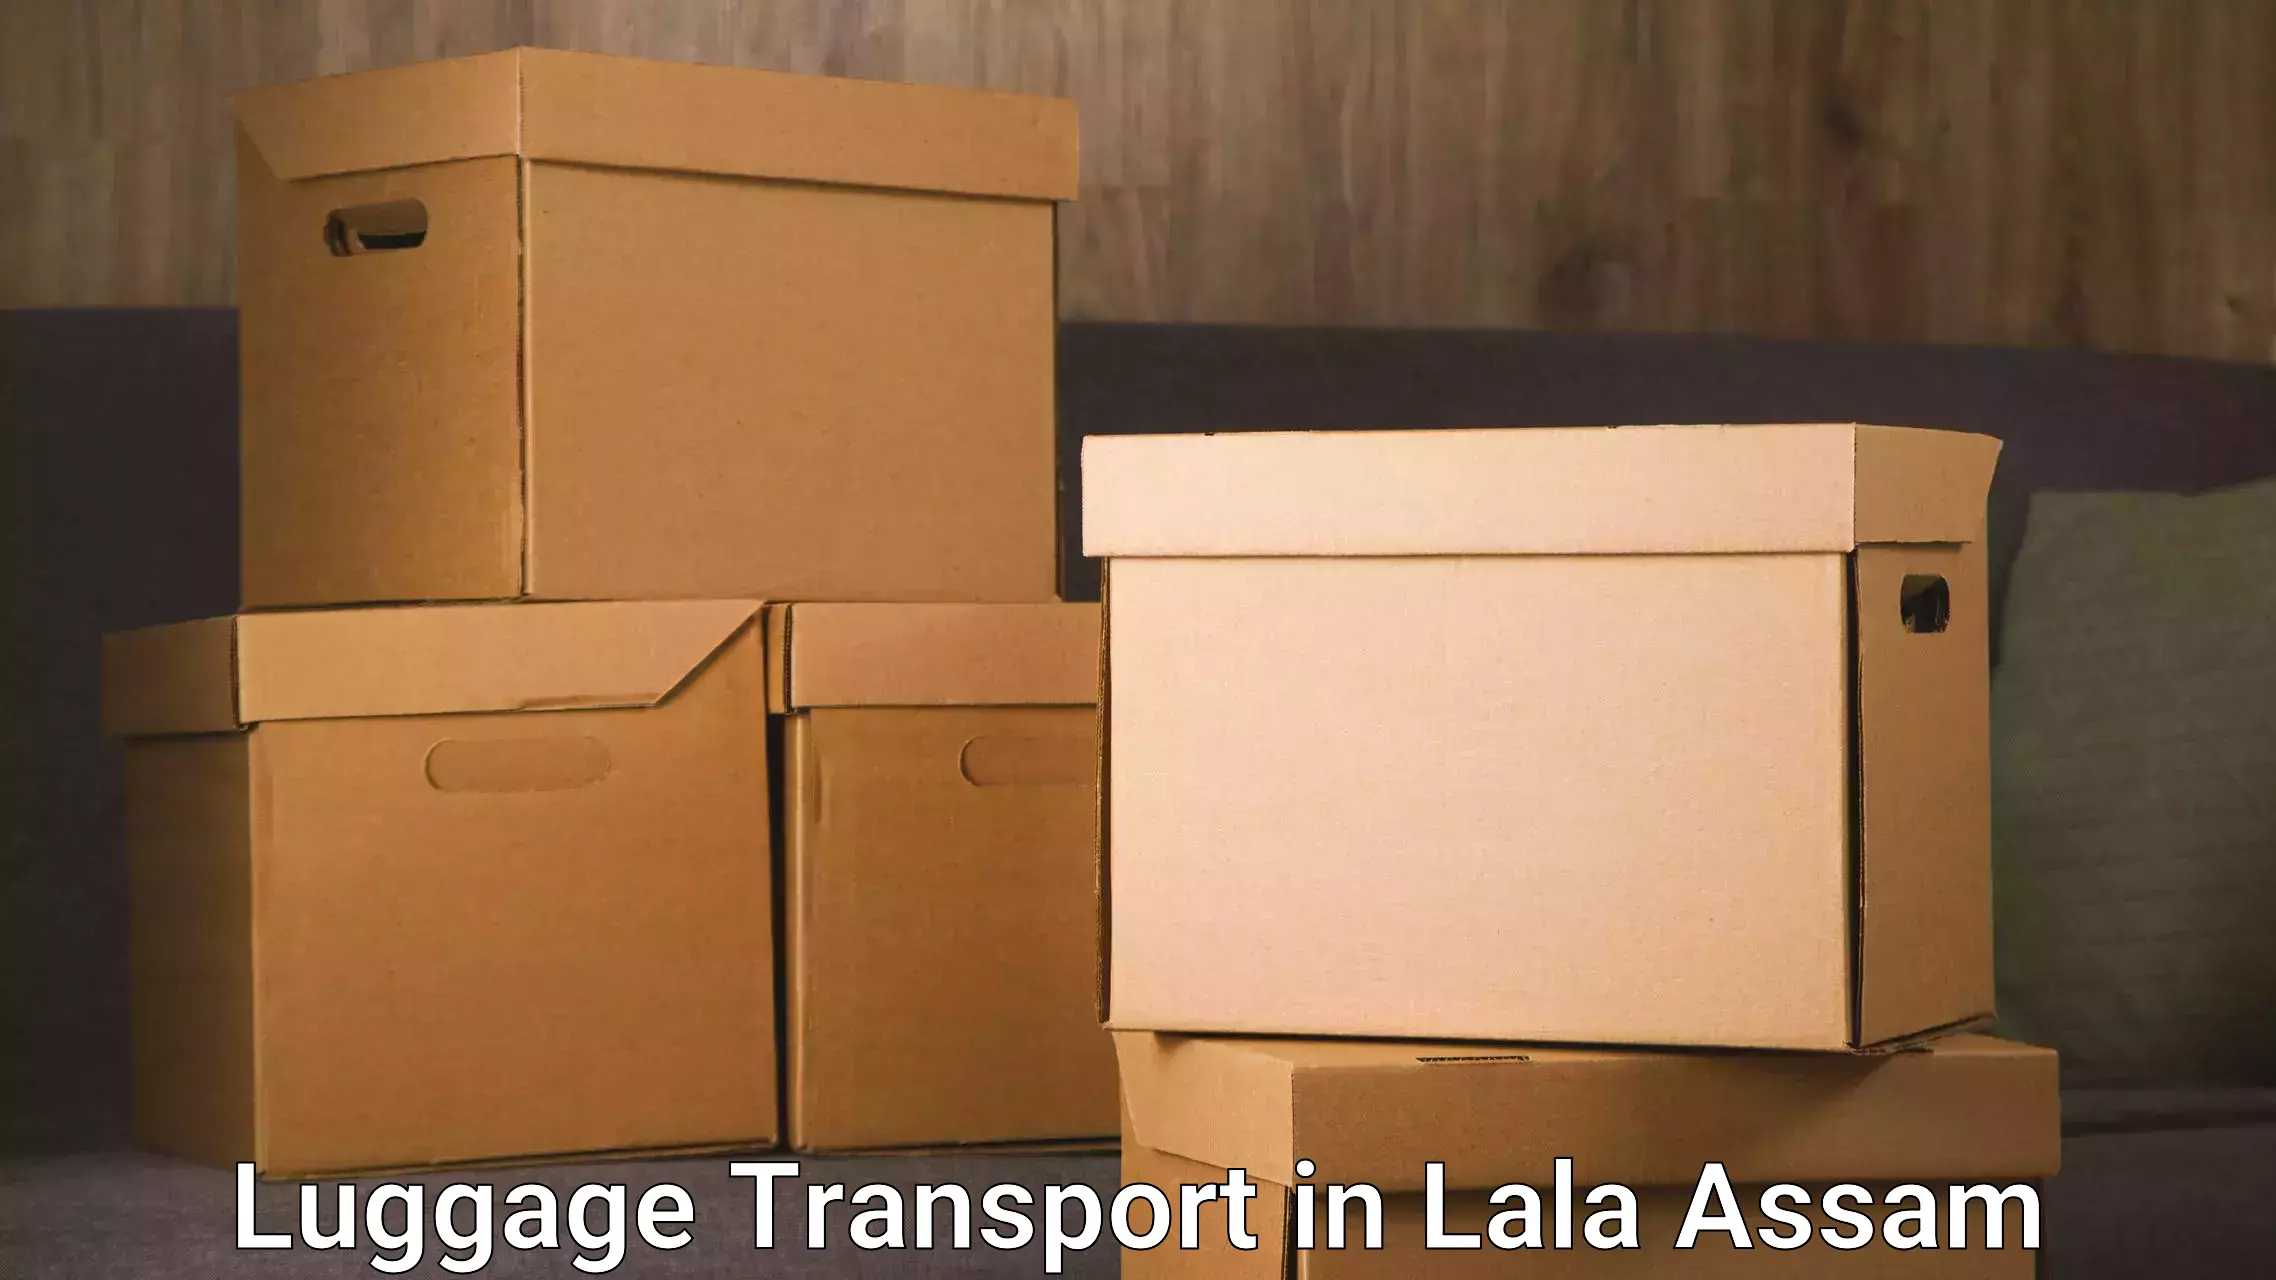 Luggage delivery news in Lala Assam